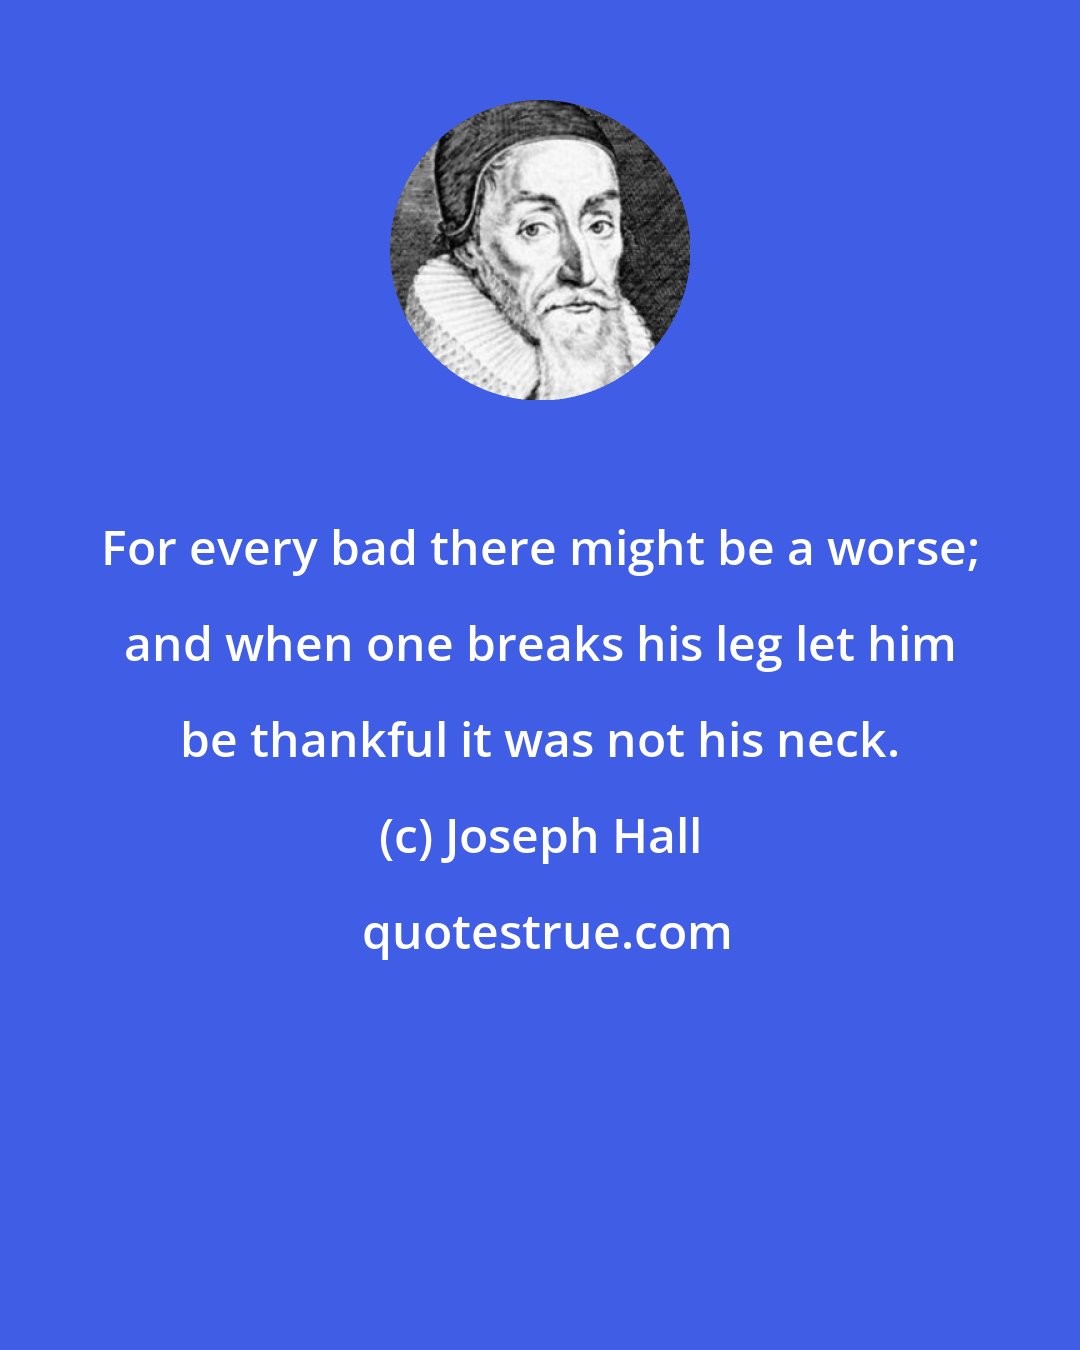 Joseph Hall: For every bad there might be a worse; and when one breaks his leg let him be thankful it was not his neck.